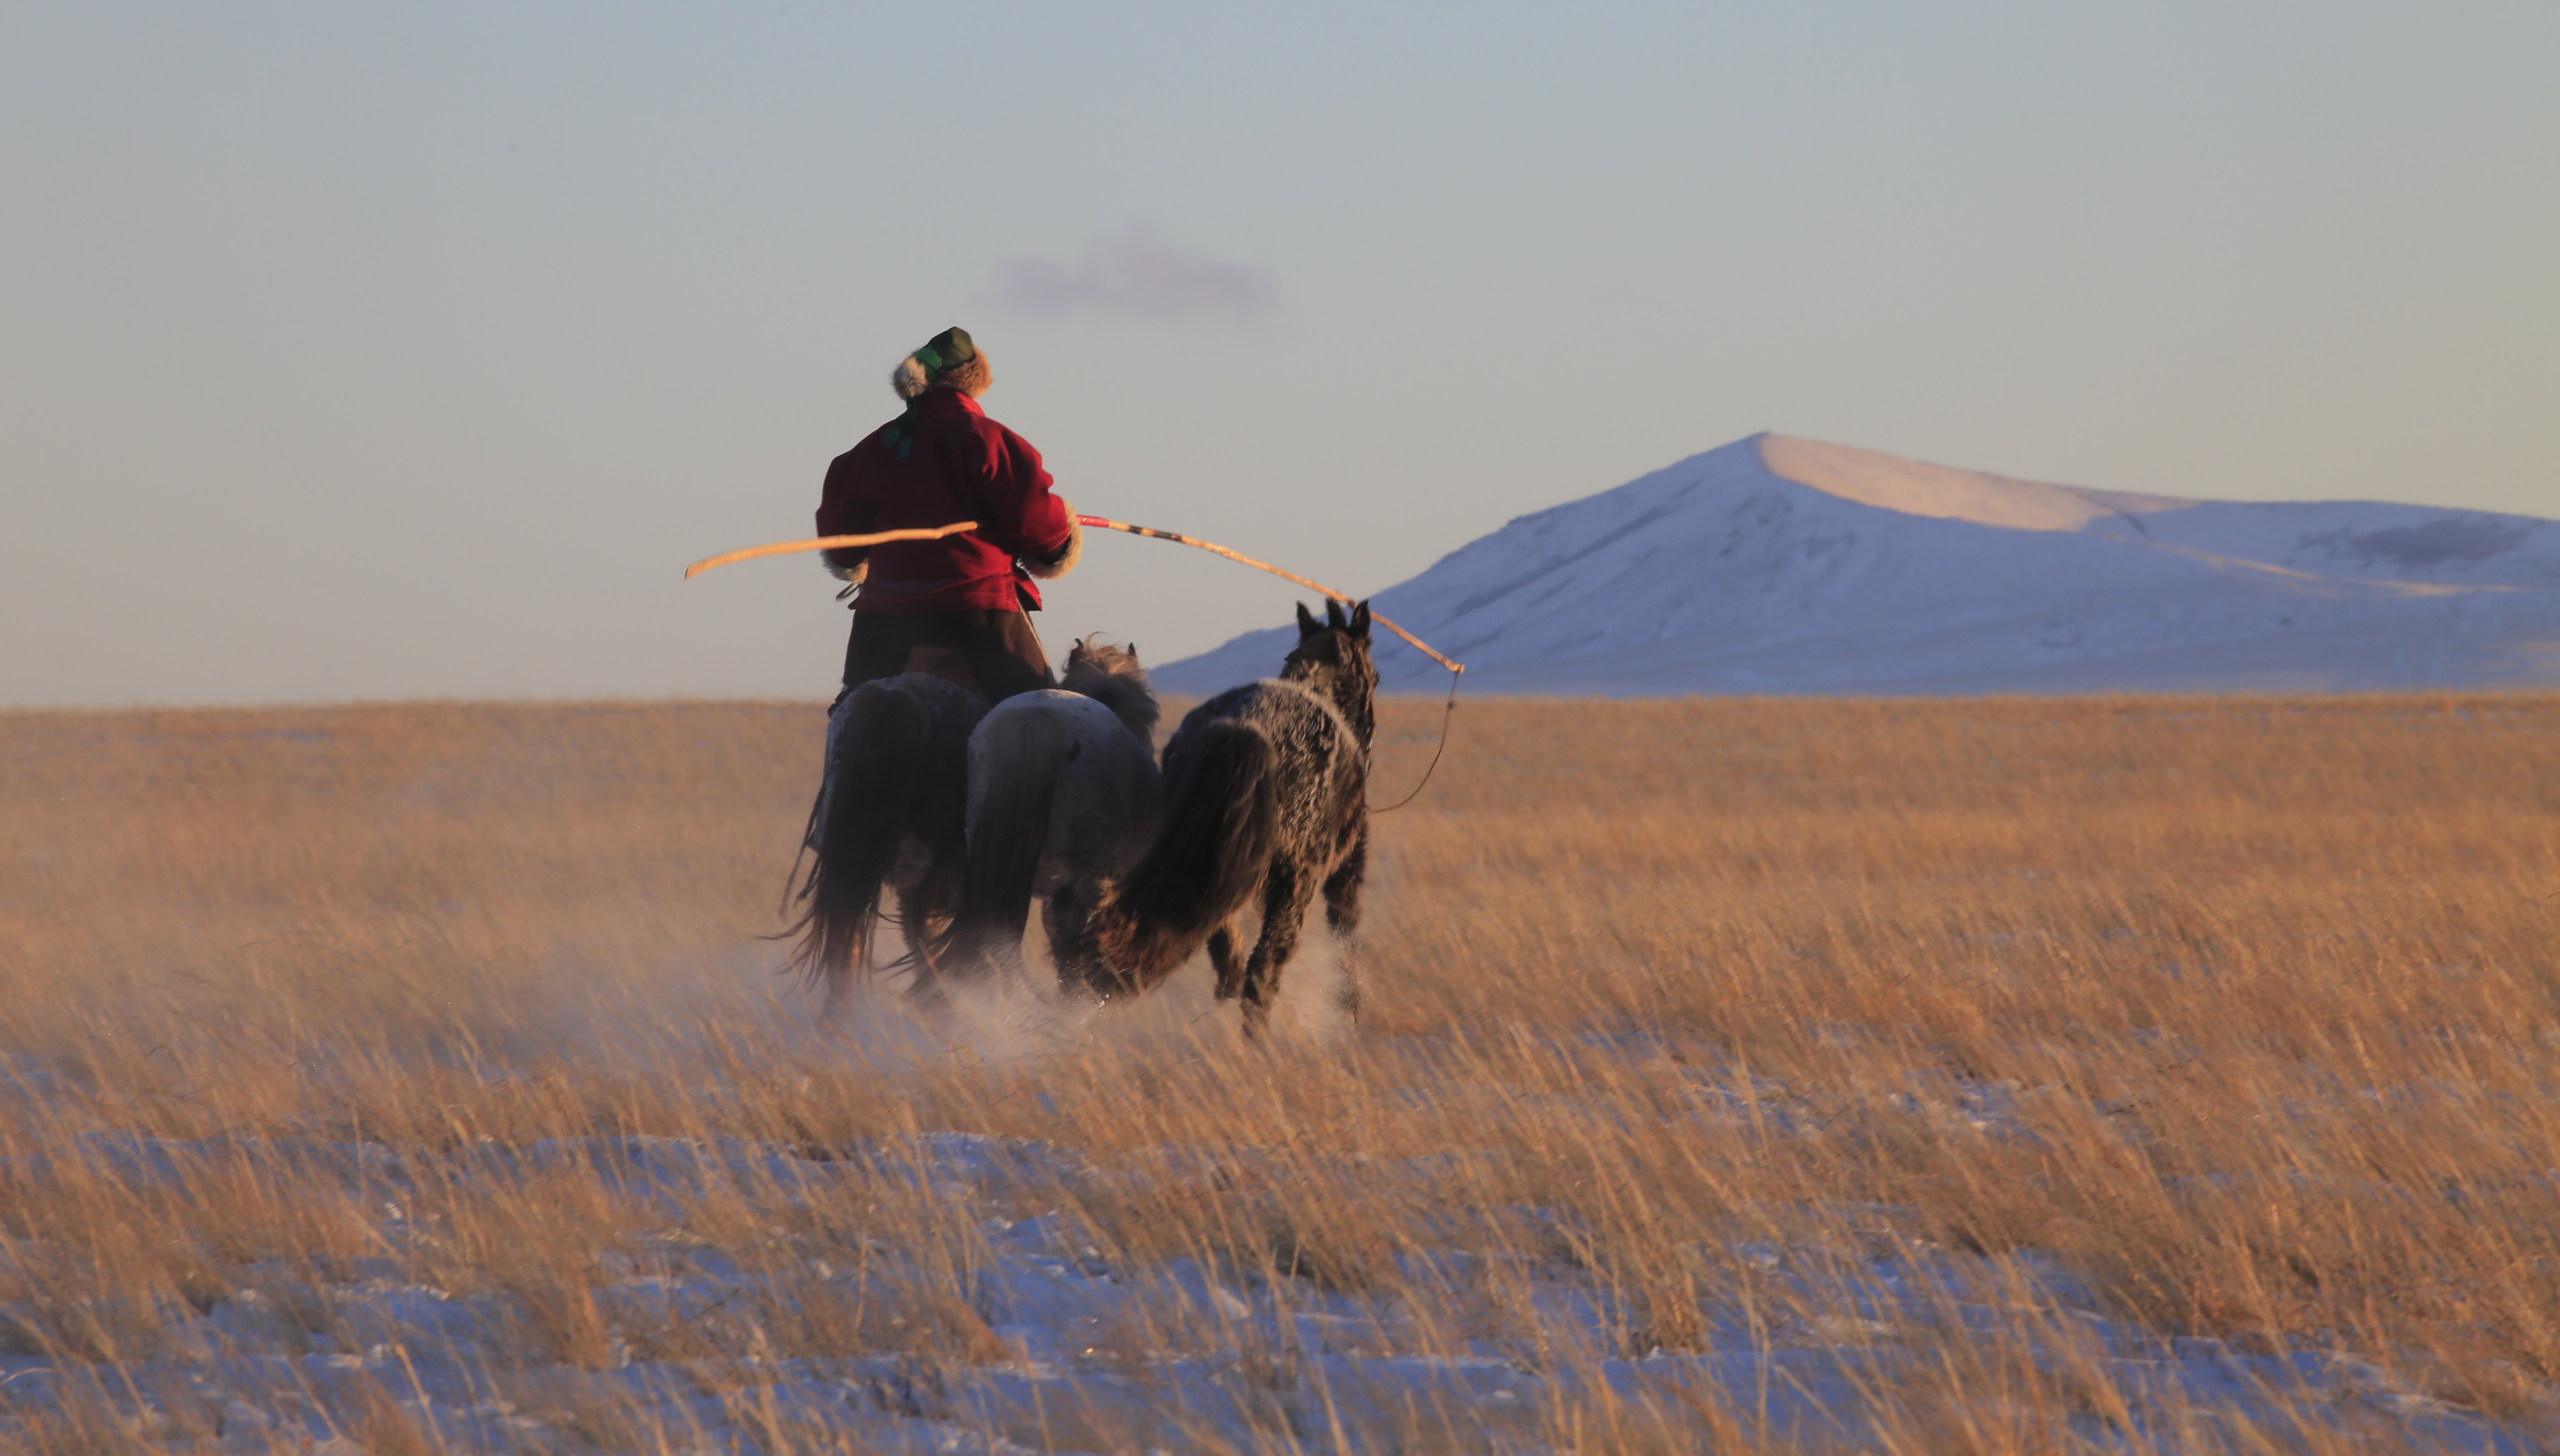 A herder with animals looks out towards the horizon with ice covering the ground.